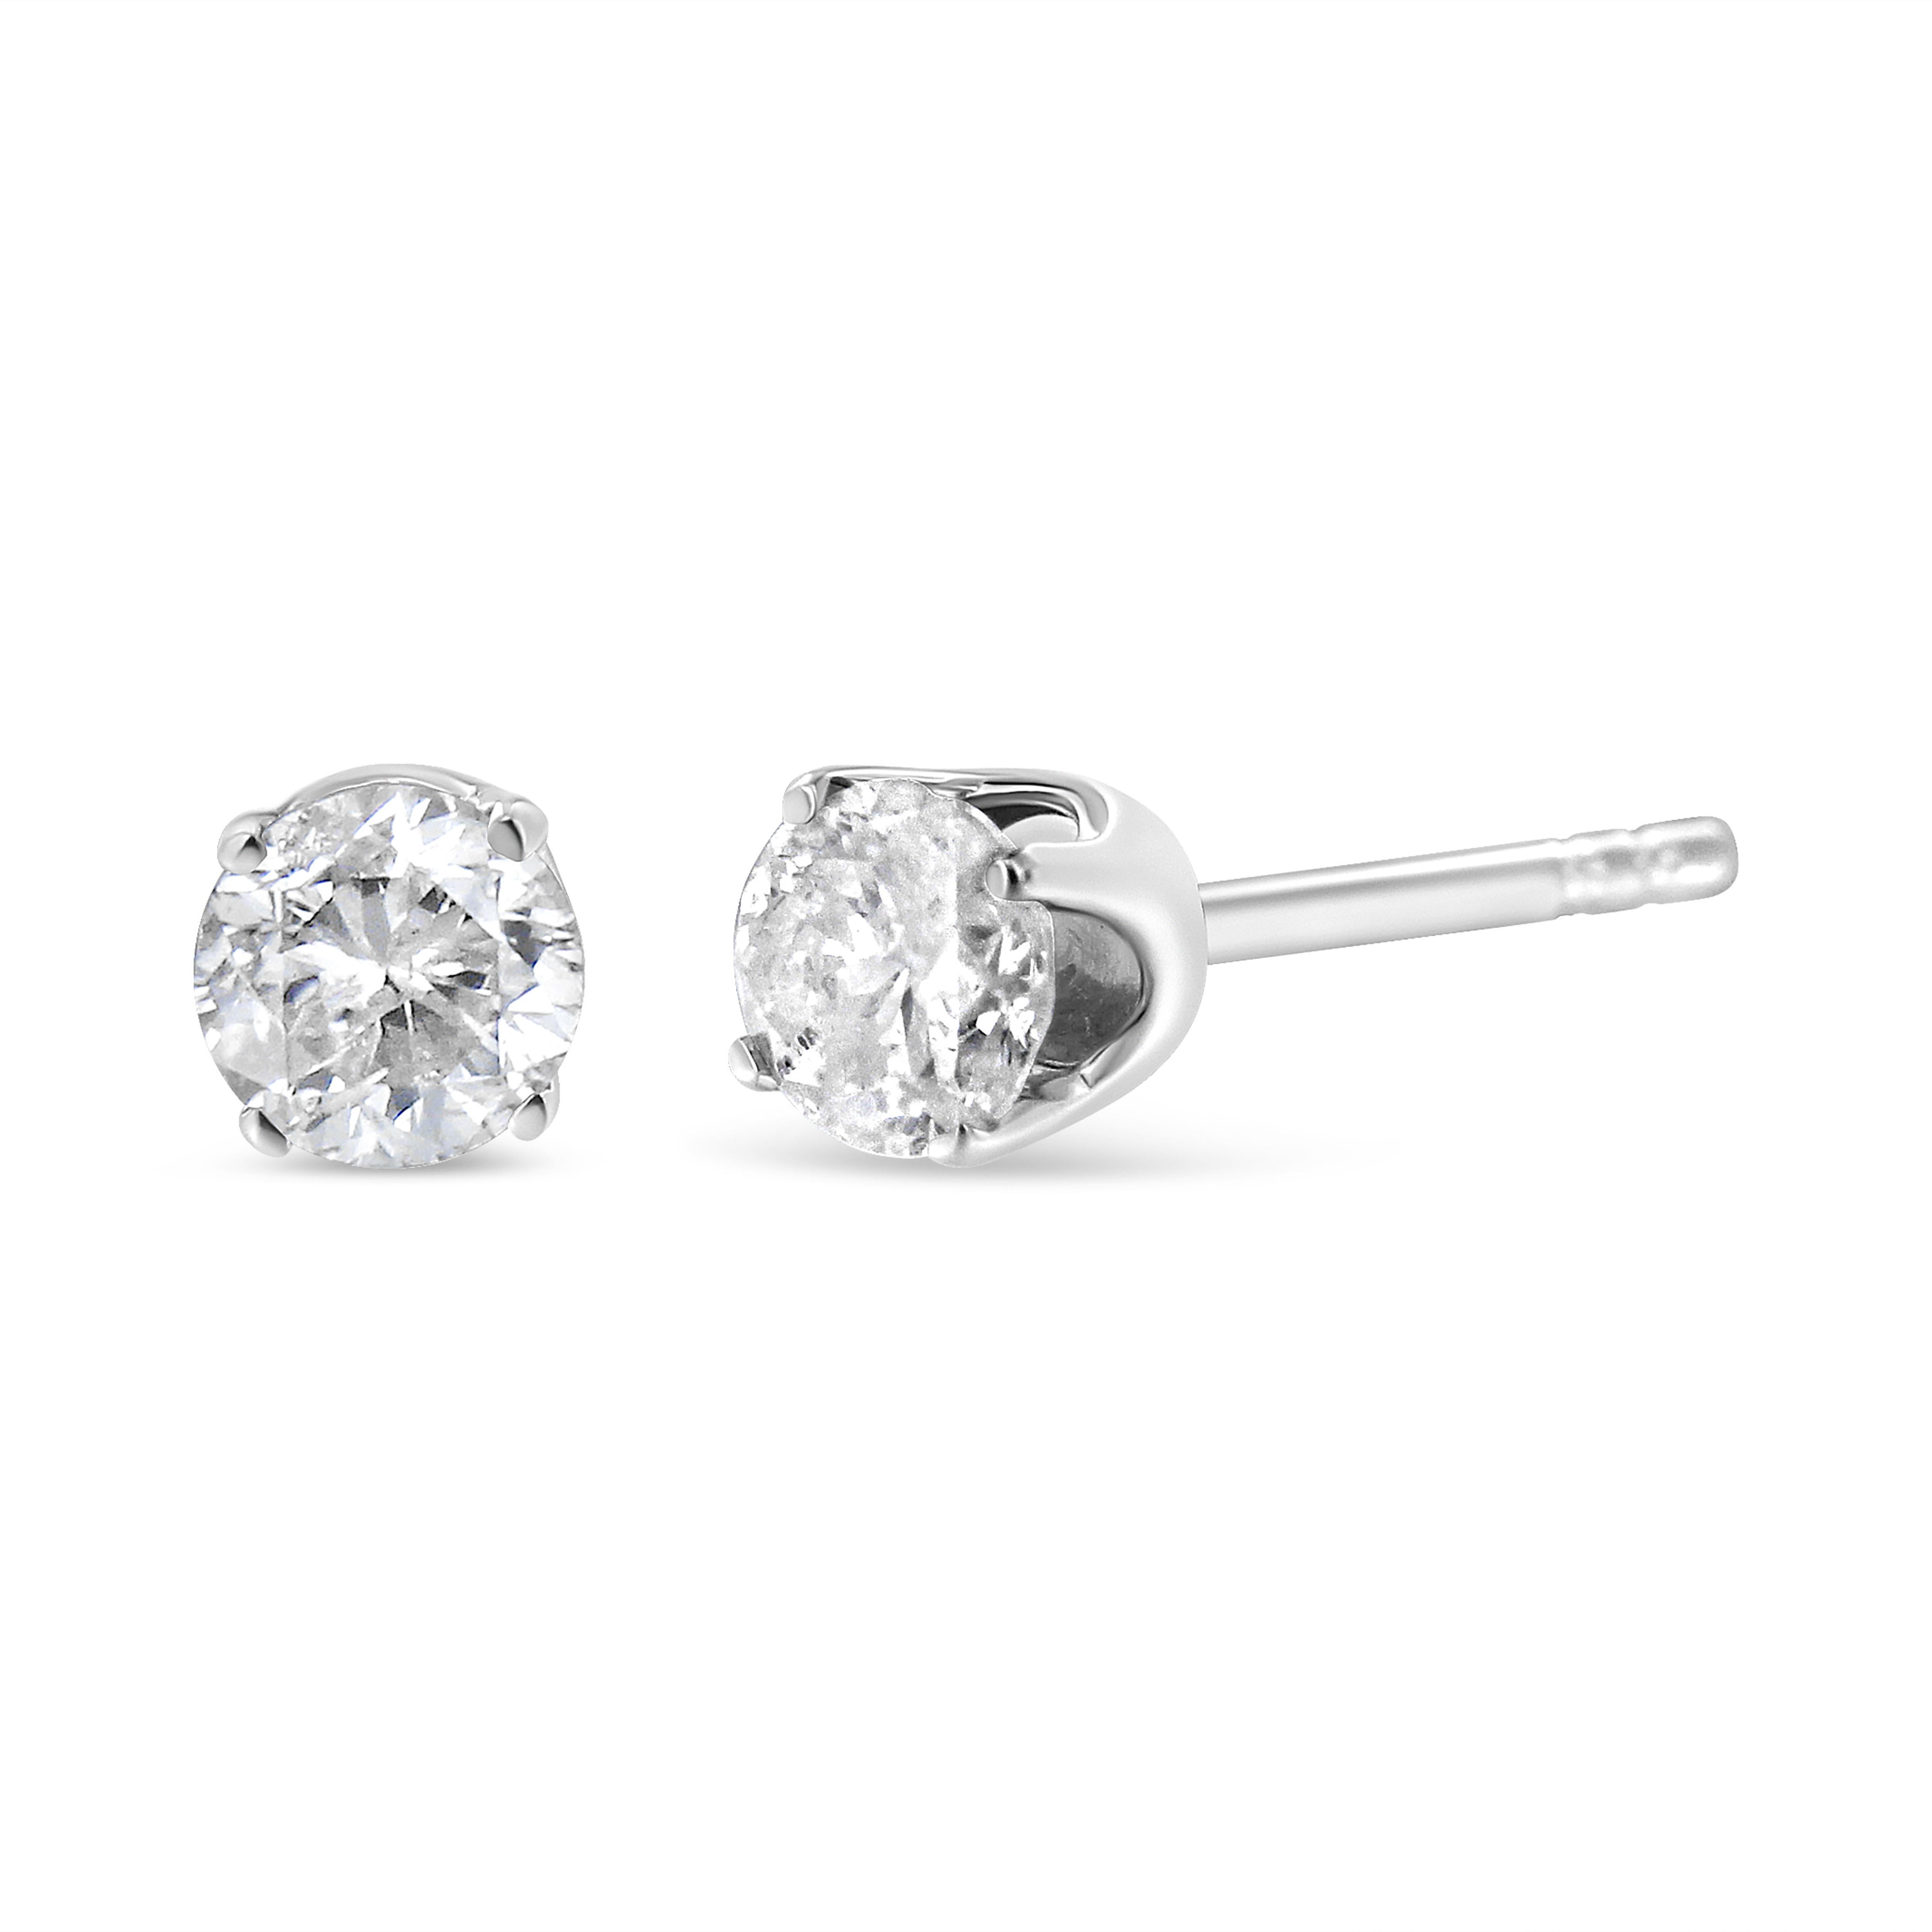 Celebrate any occasion with these classic shimmering diamond stud earrings. Crafted from 14k white gold each earring showcases a sparkling brilliant round-cut solitaire diamond in a 4-Prong Setting. Dazzling with 1.0 cttw of diamonds and a bright